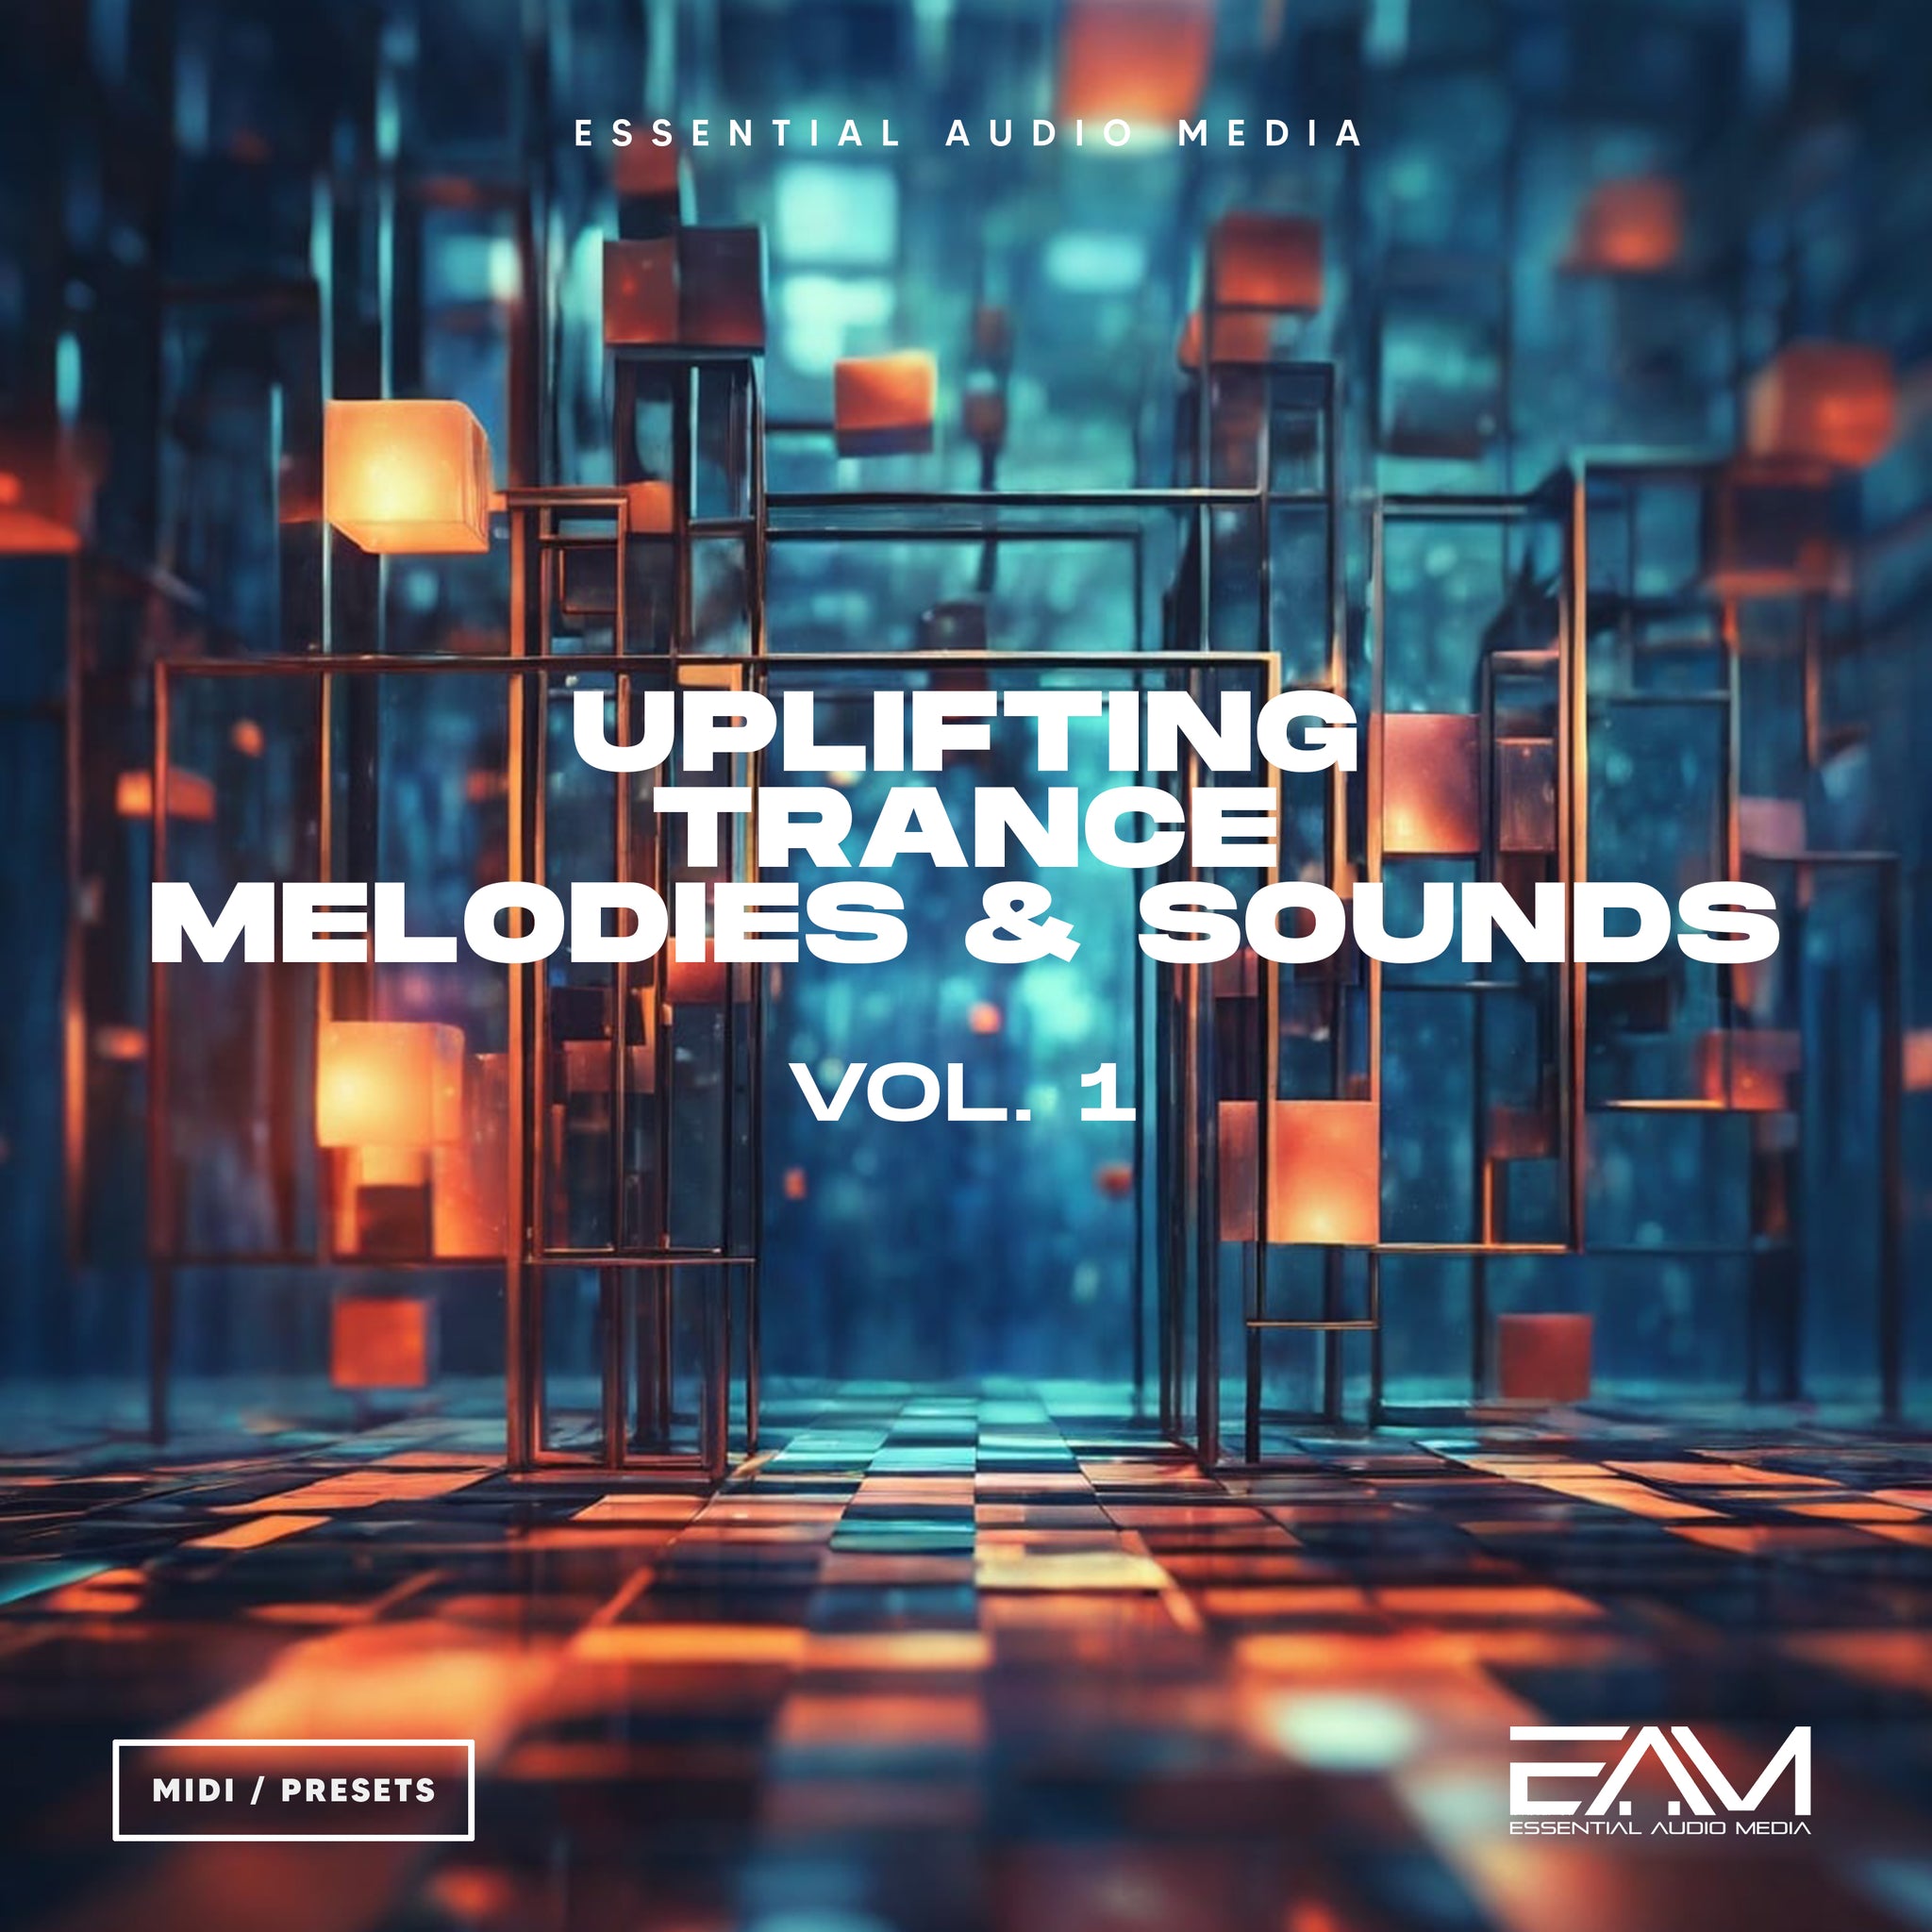 Uplifting Trance Melodies & Sounds Vol.1